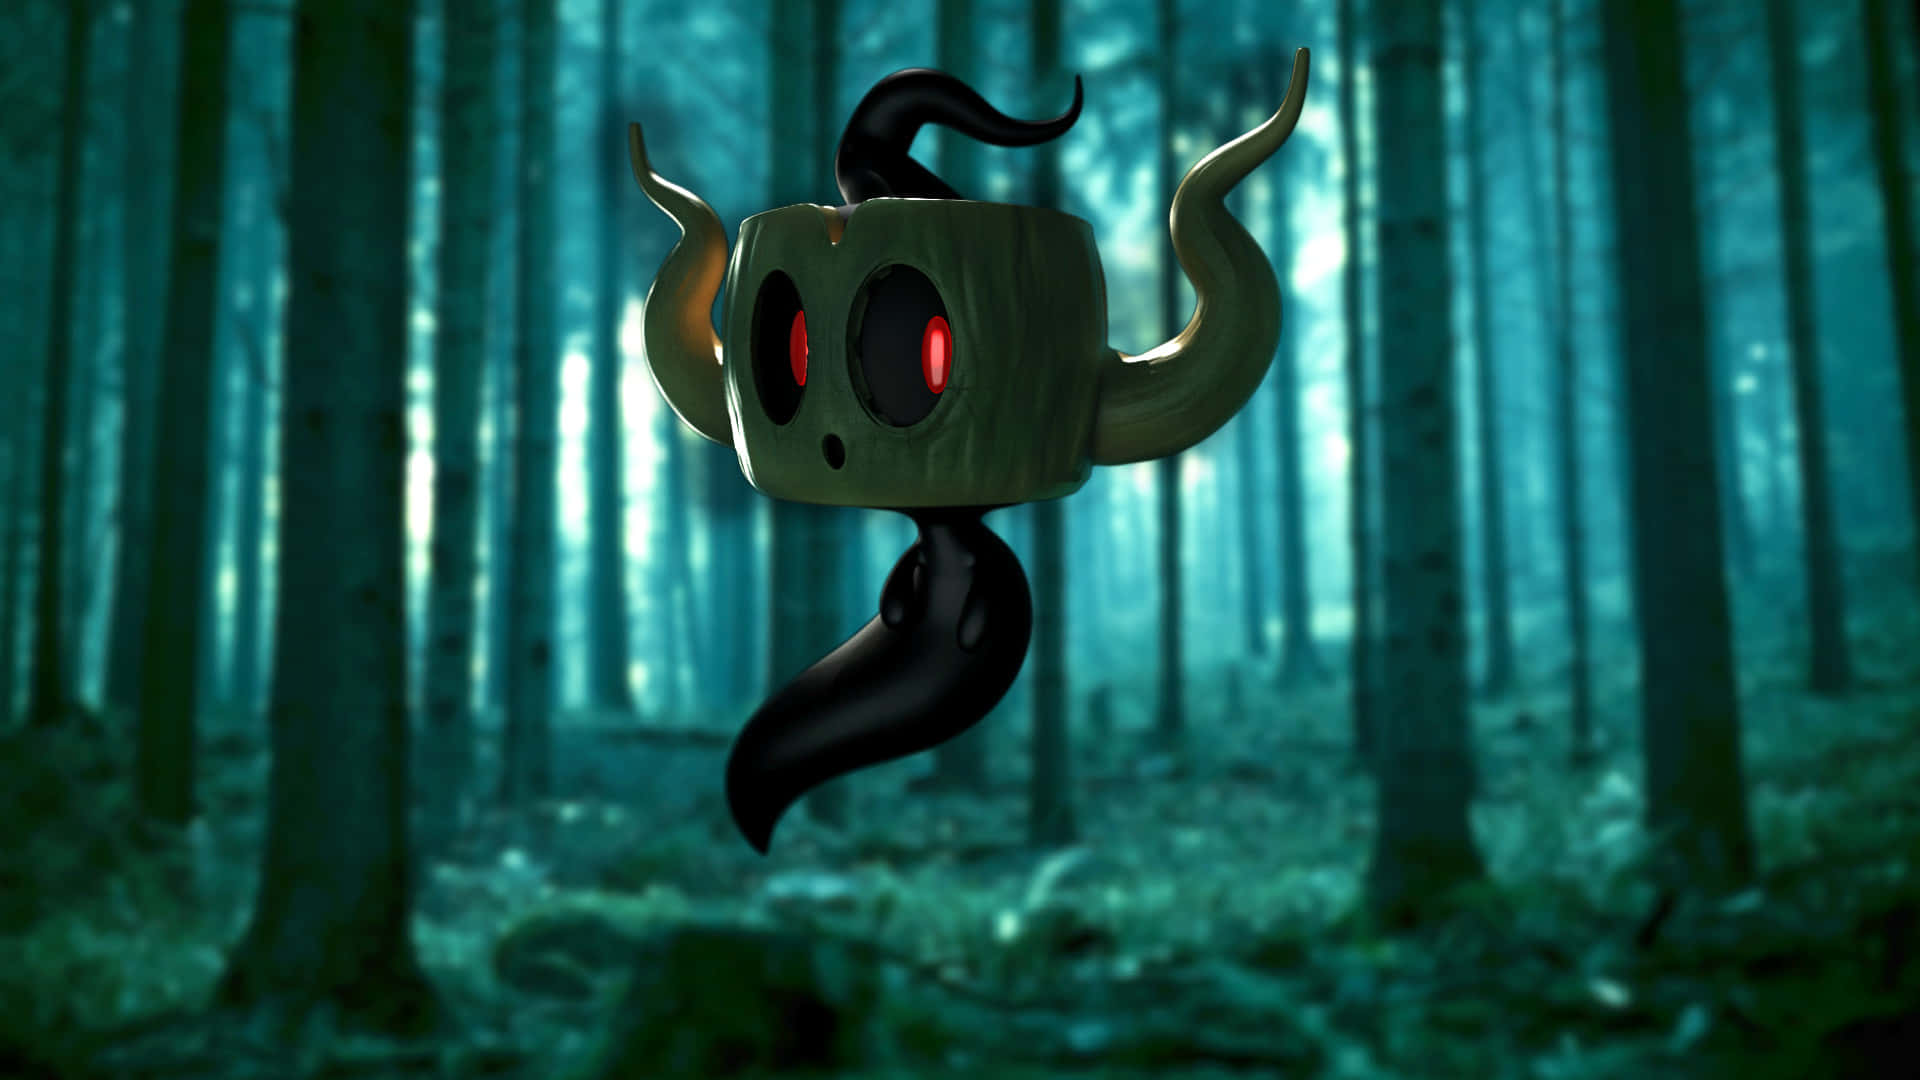 Phantump In The Forest Wallpaper